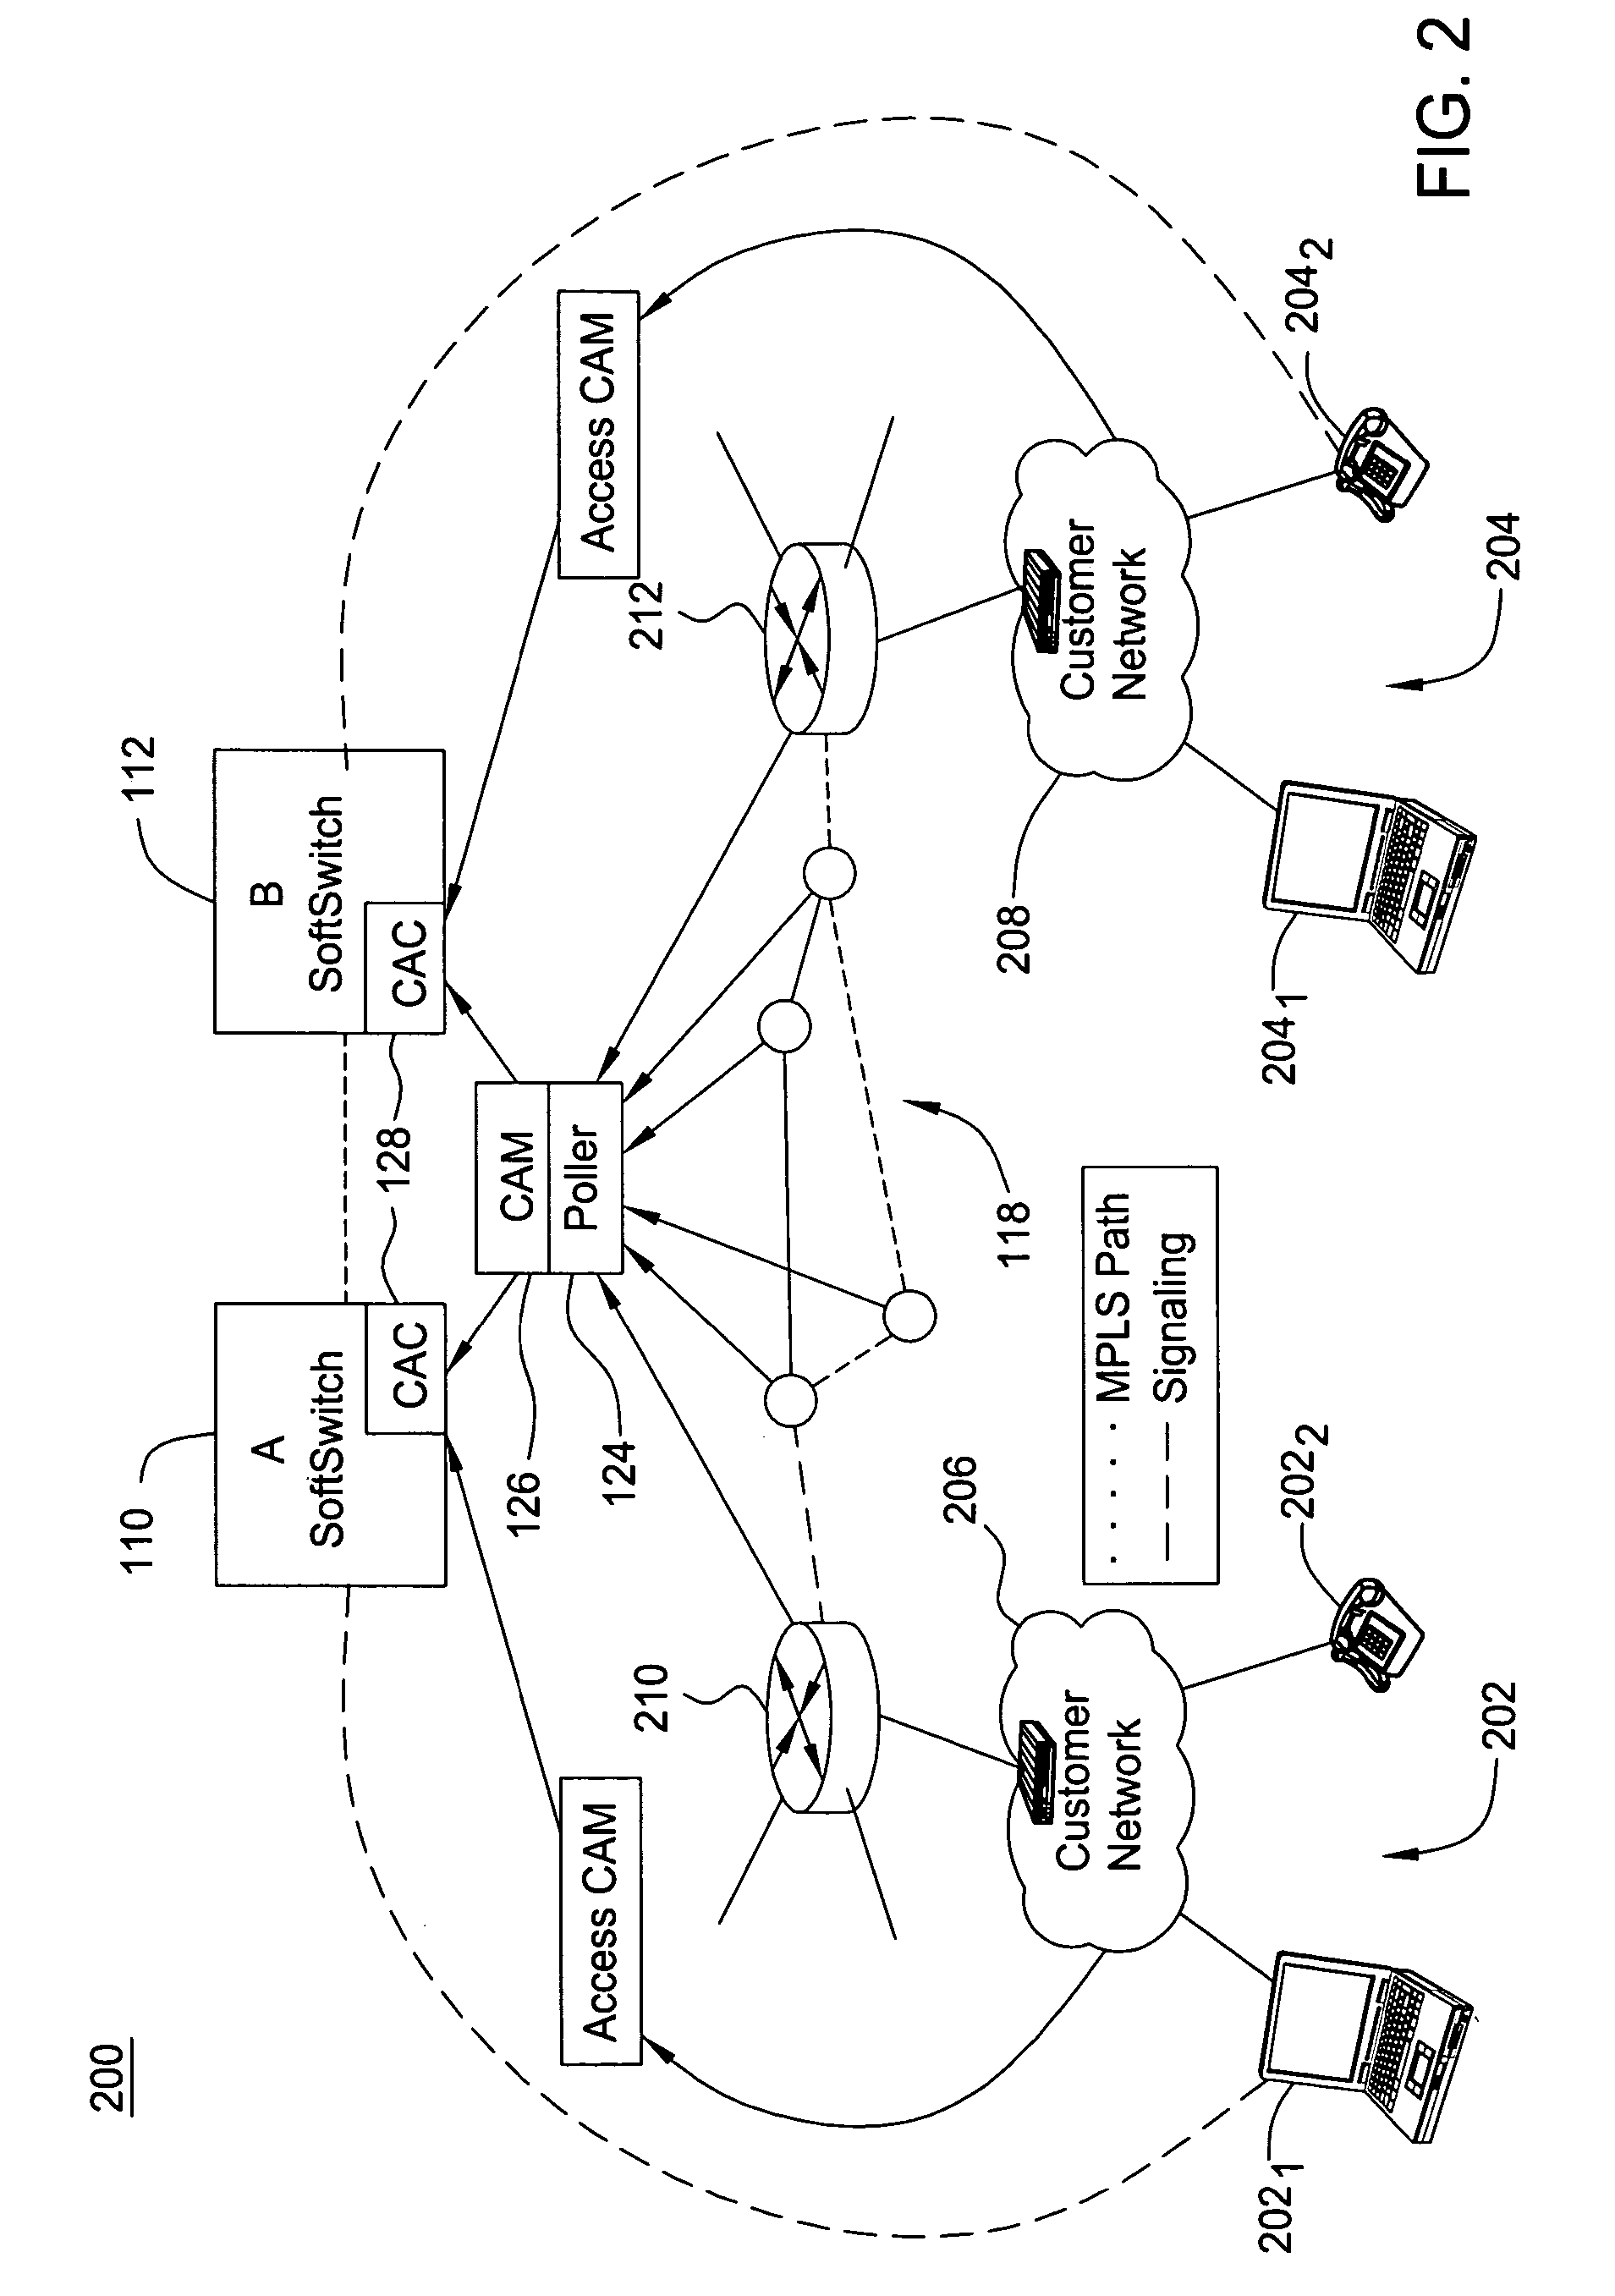 Method for management of voice-over IP communications